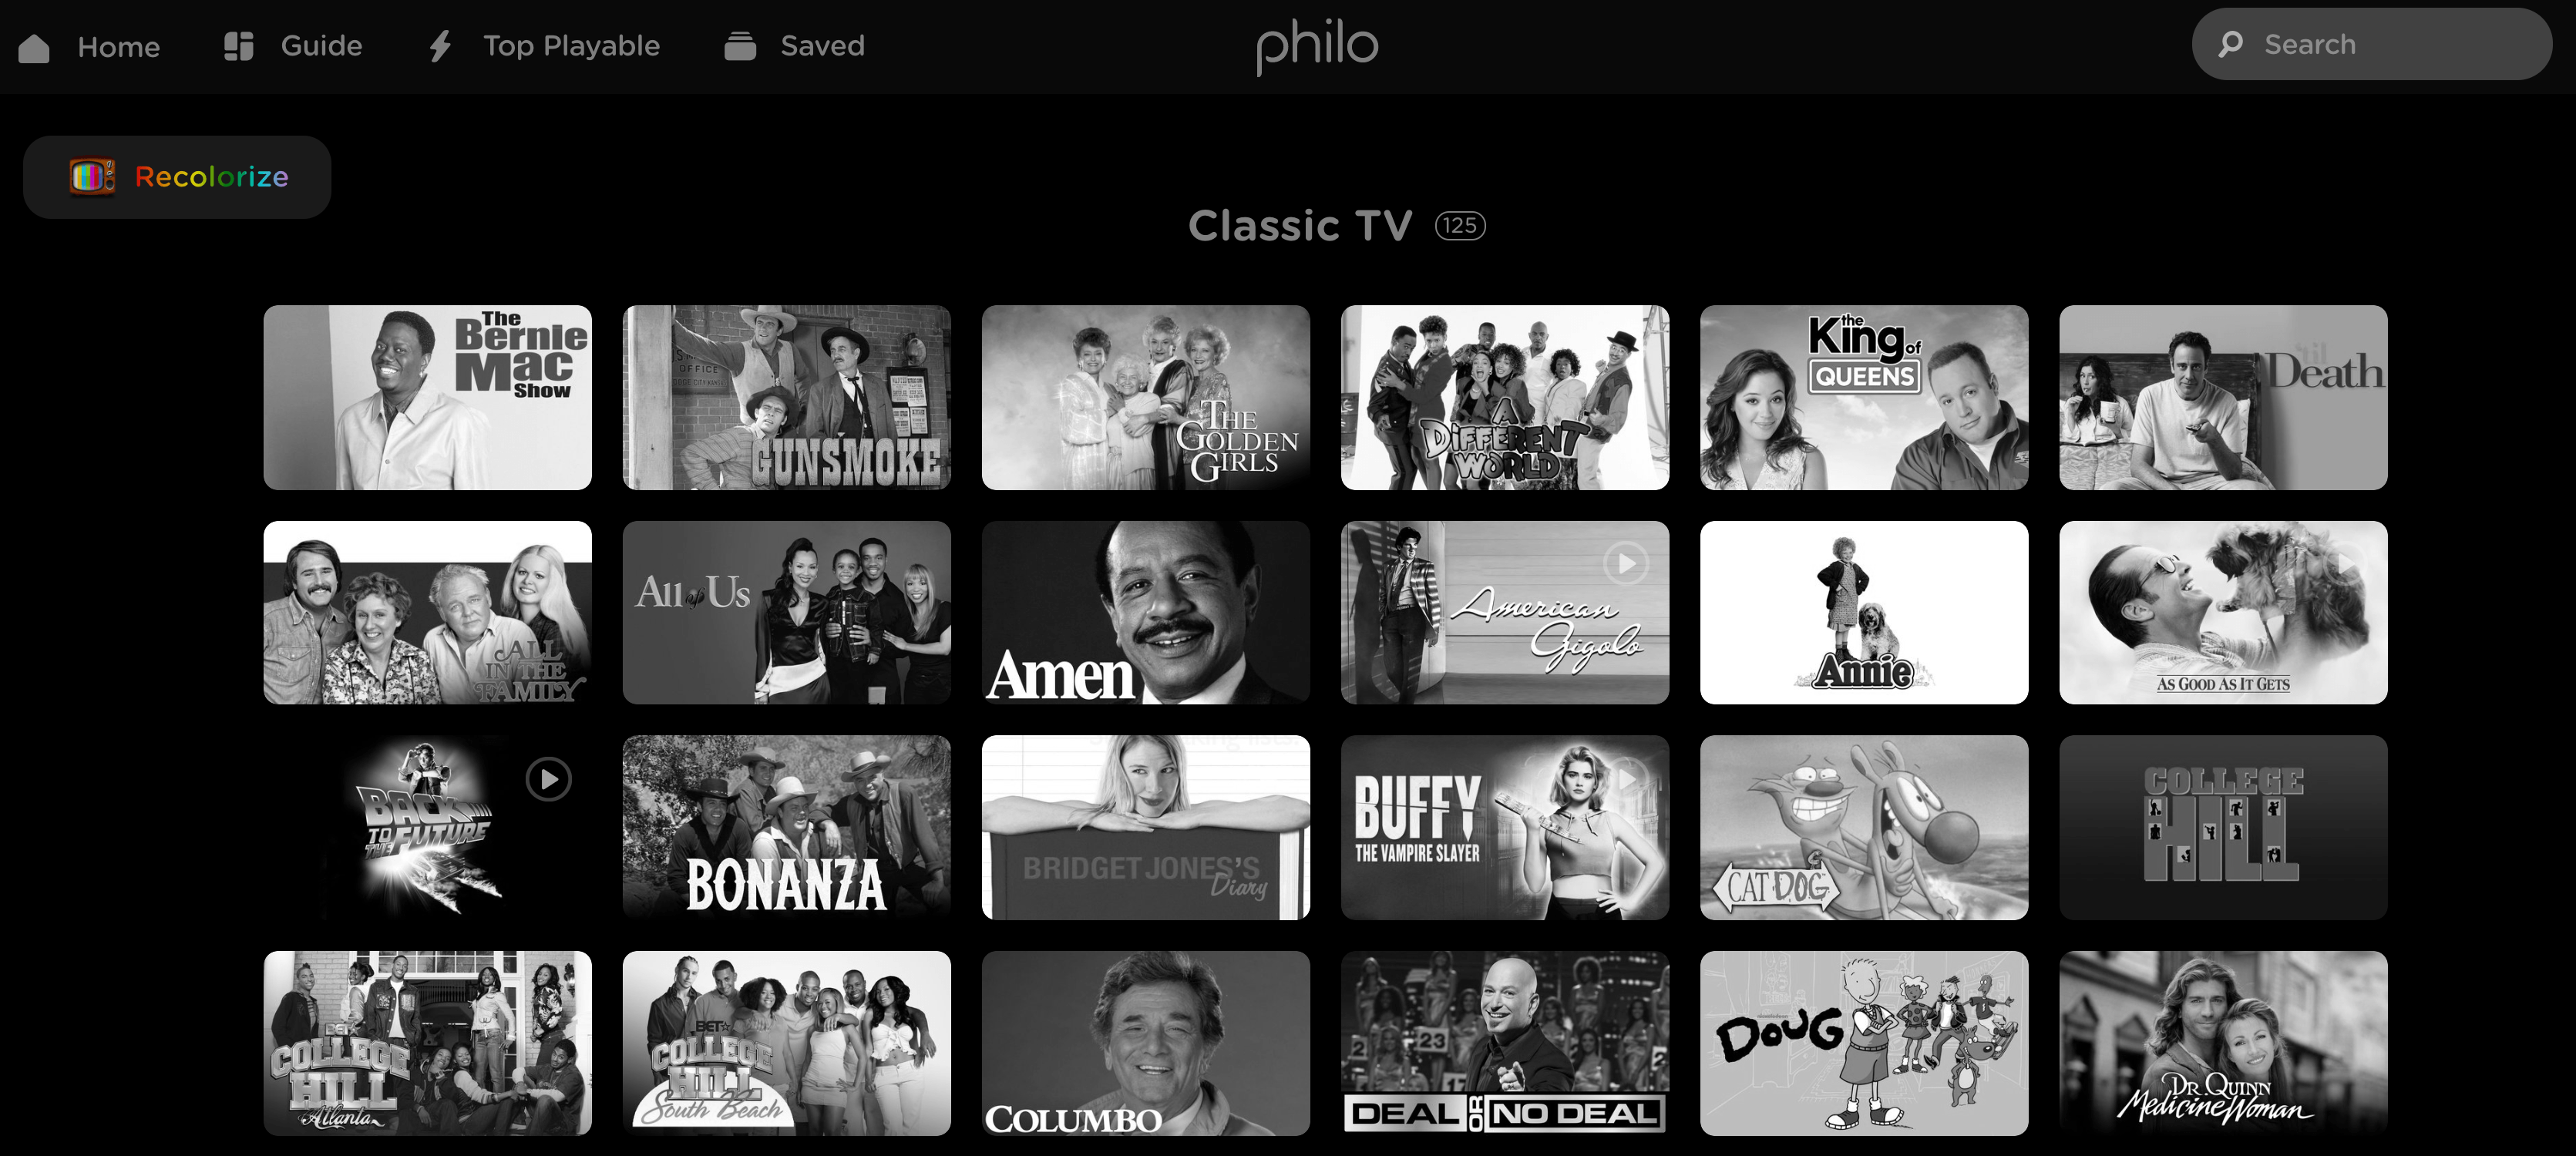 Philo Launches Classic TV Collection (and a Fun April Fools Day Surprise)